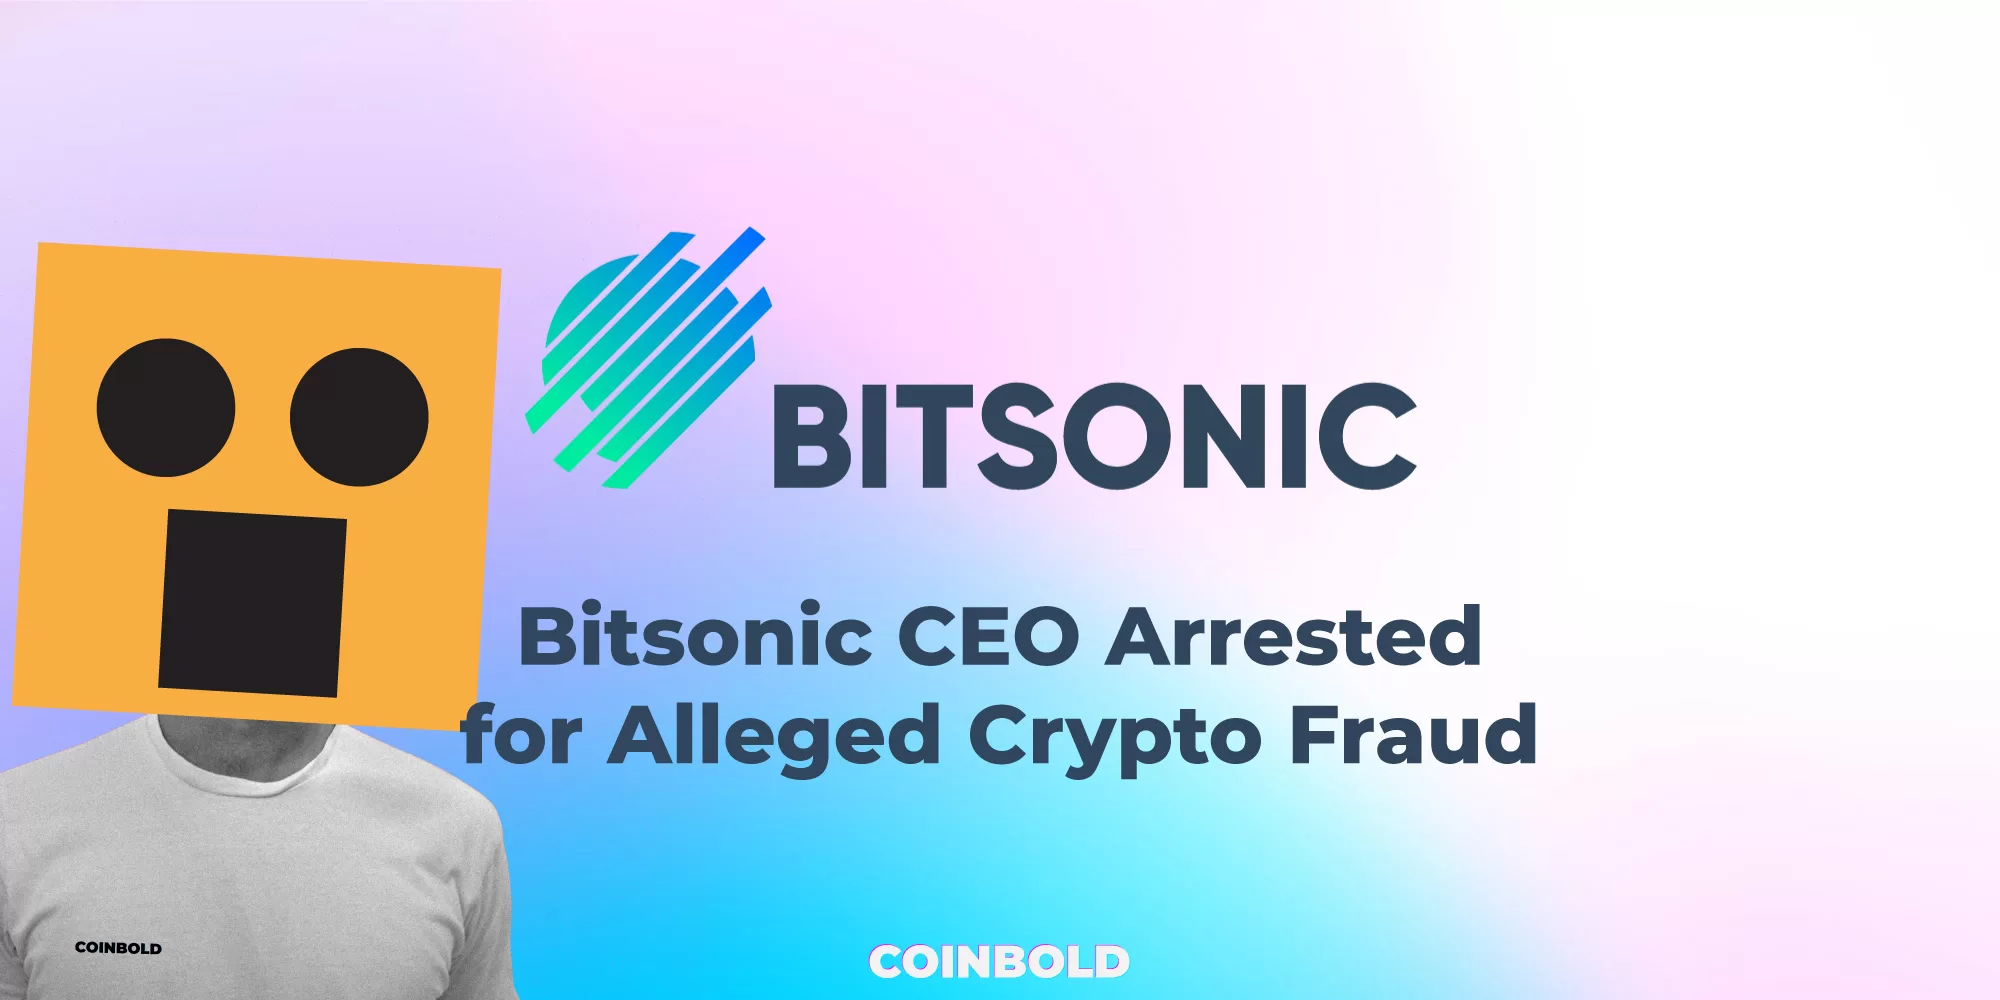 Bitsonic CEO Arrested for Alleged Crypto Fraud